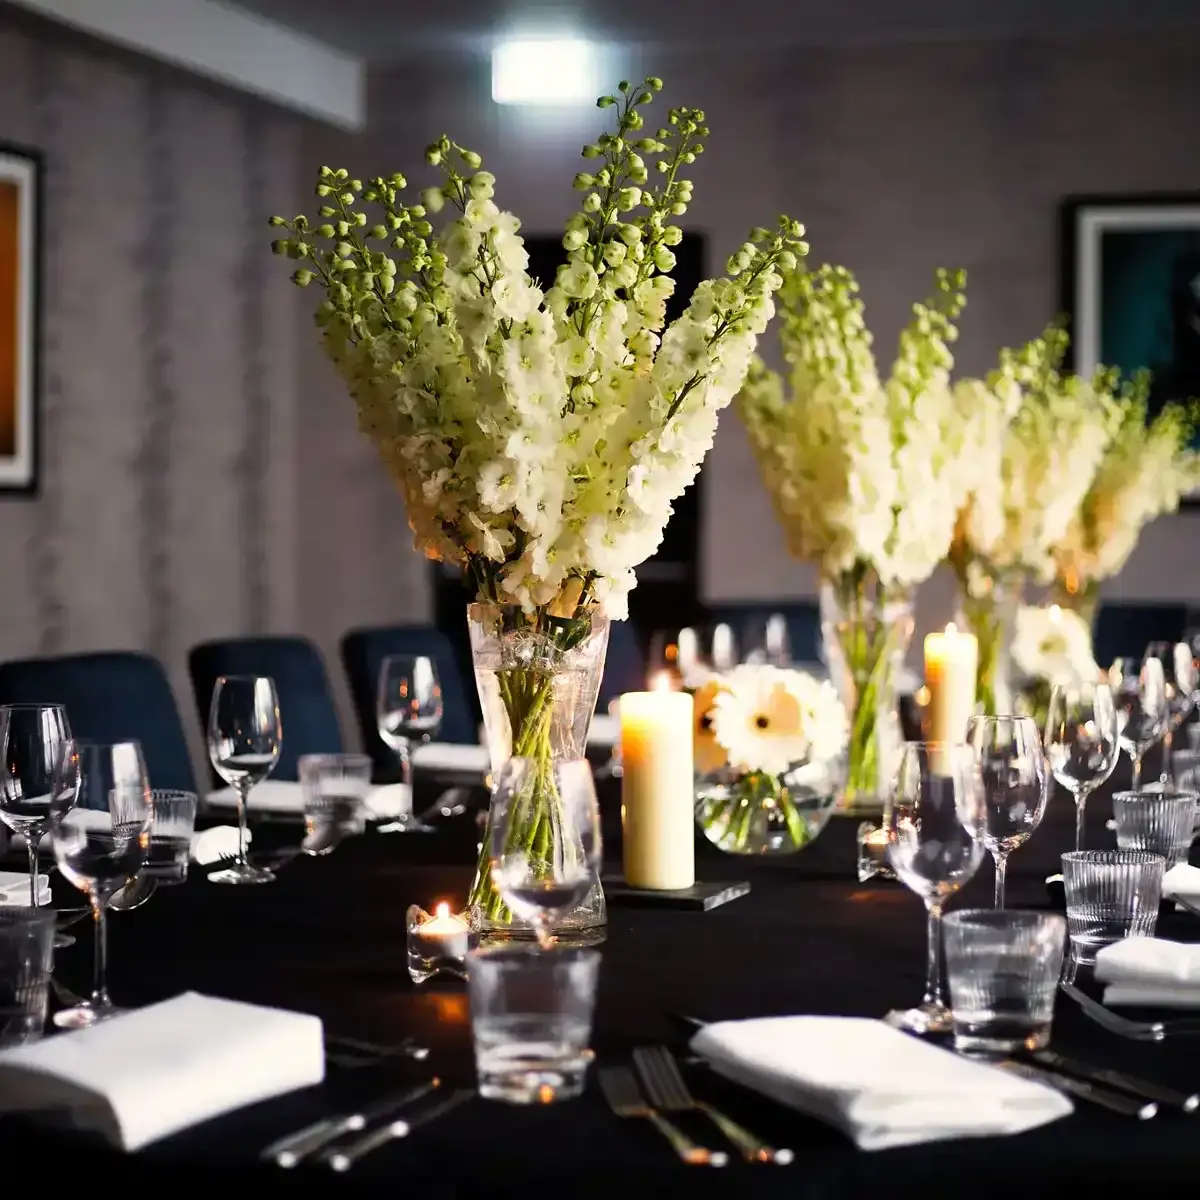 A beautifully arranged table for a formal dinner adorned with elegant candles and exquisite flowers.